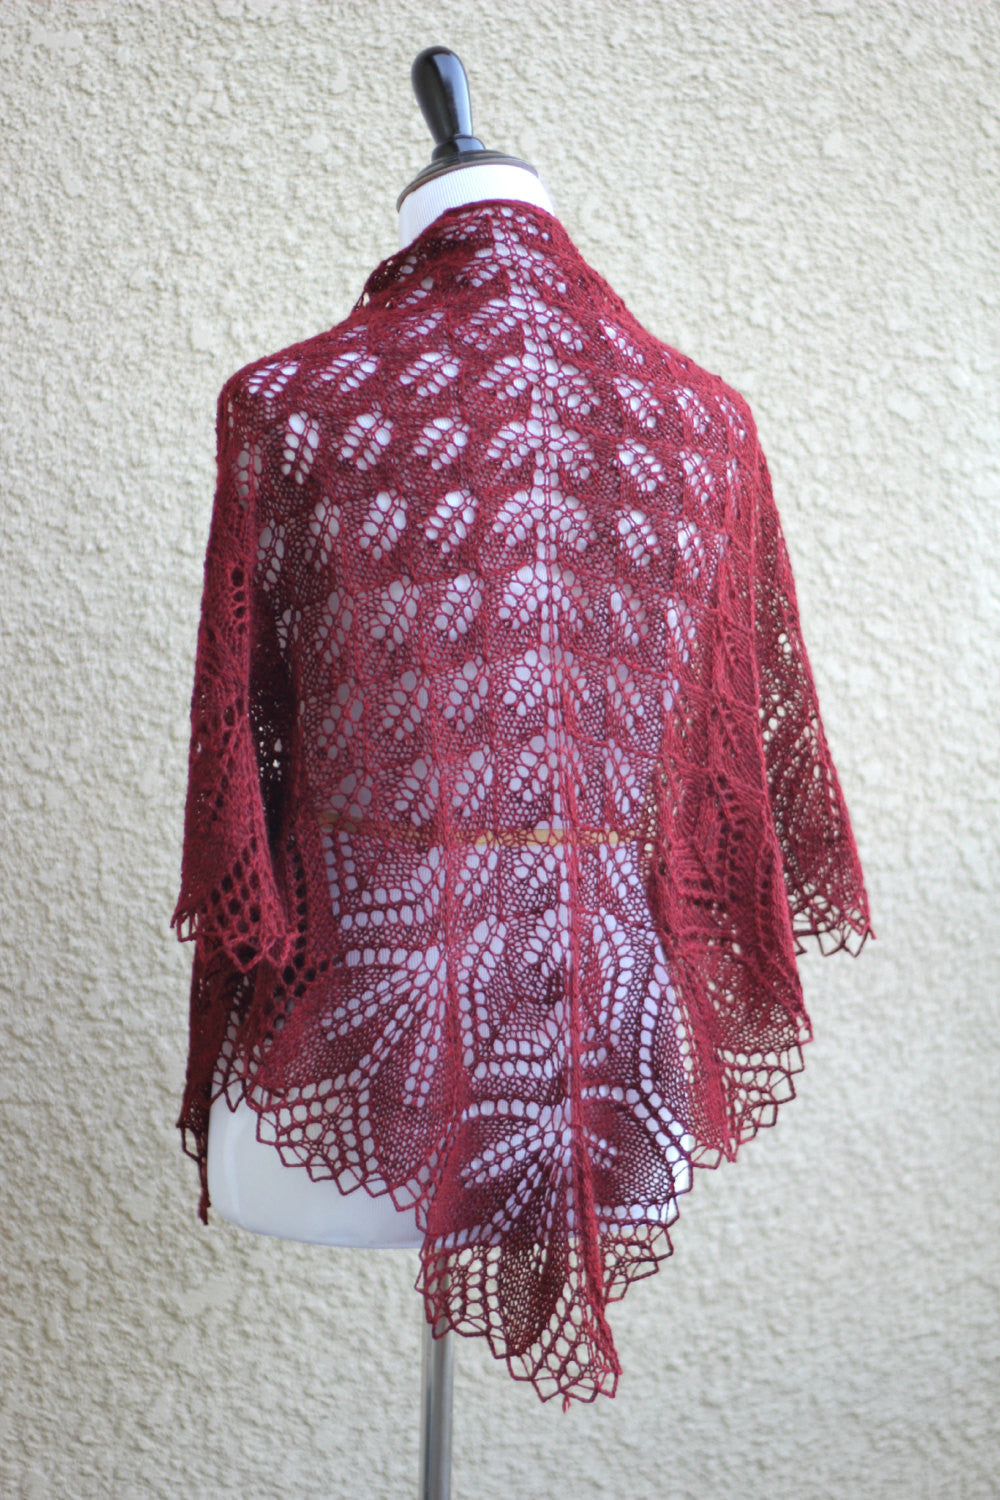 Knitted lace shawl in marsala color